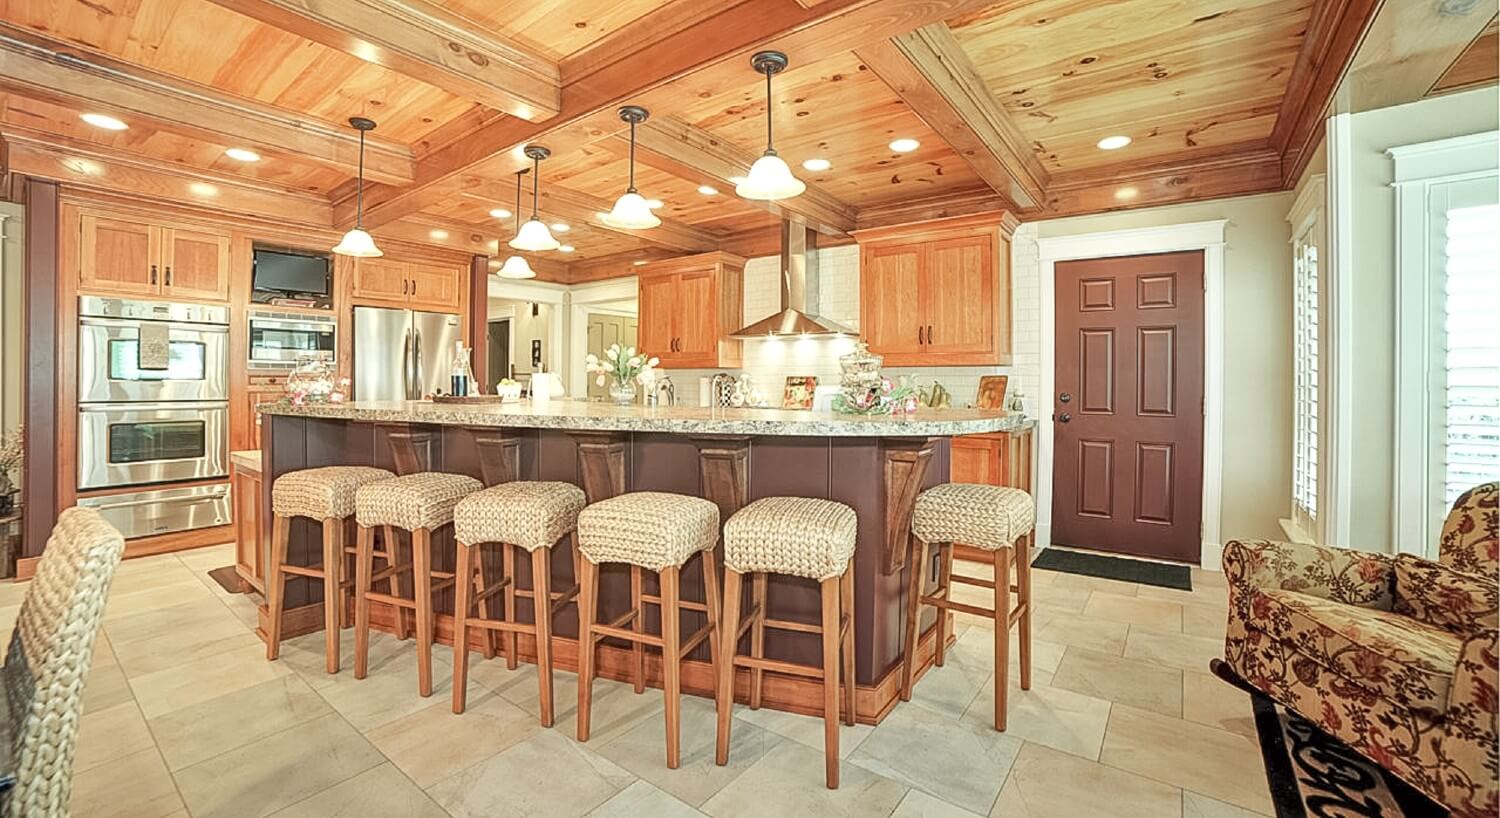 Expansive kitchen with large island and stools, pendant lighting and stainless steel appliances